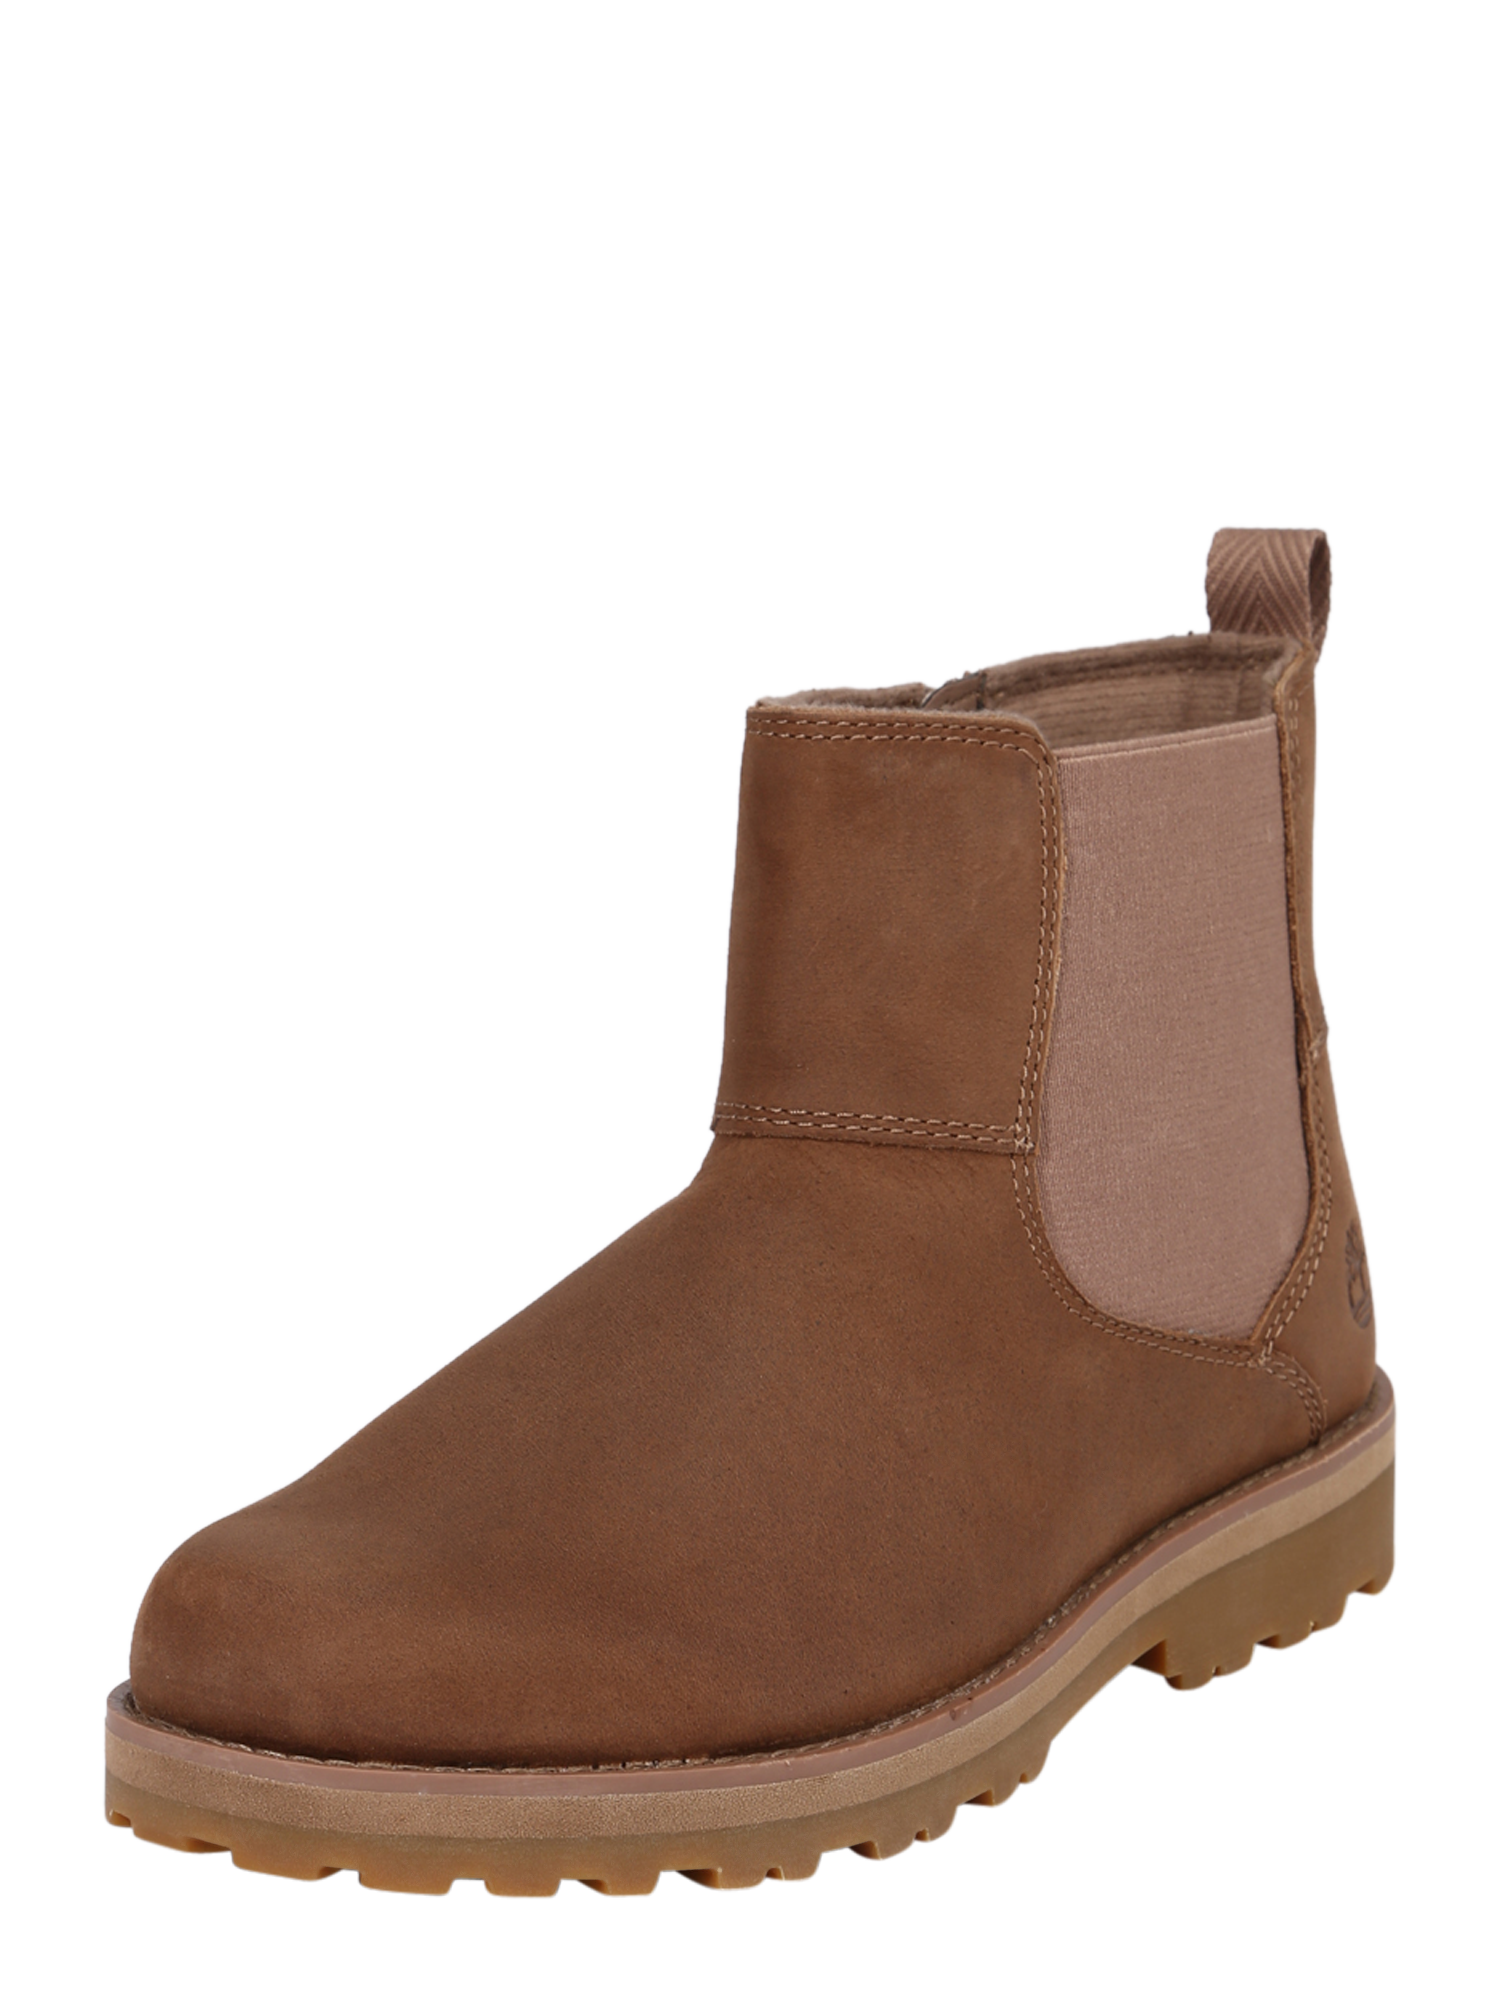 7shG9 Scarpe TIMBERLAND Boots chelsea Courma in Marrone 